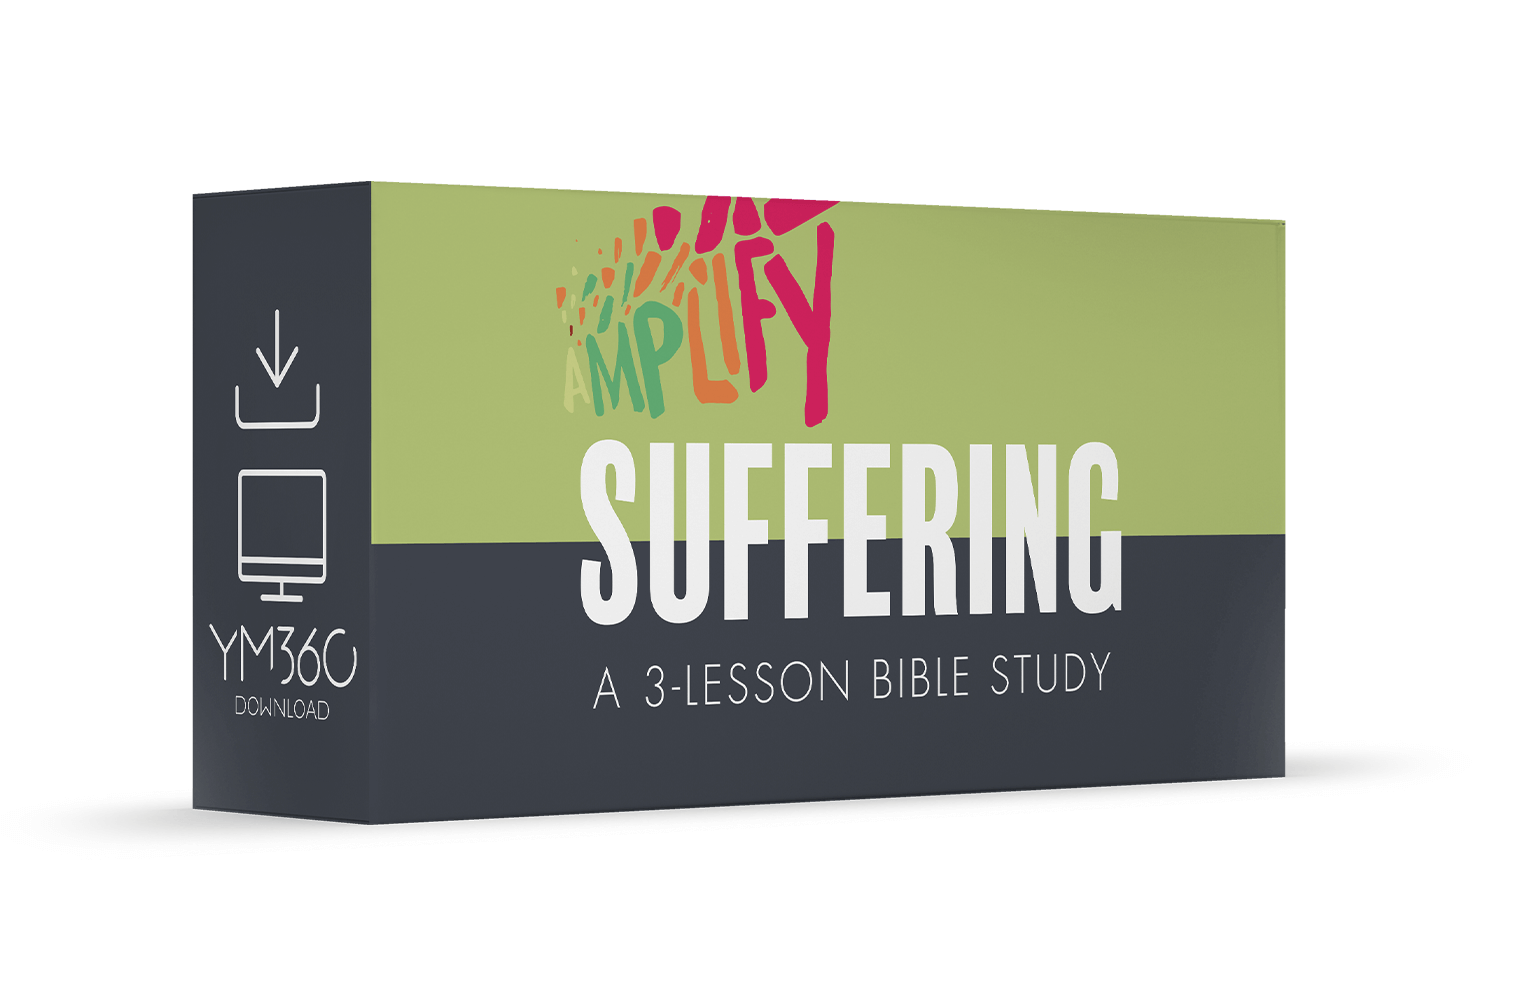 Suffering: A 3-Lesson Bible Study